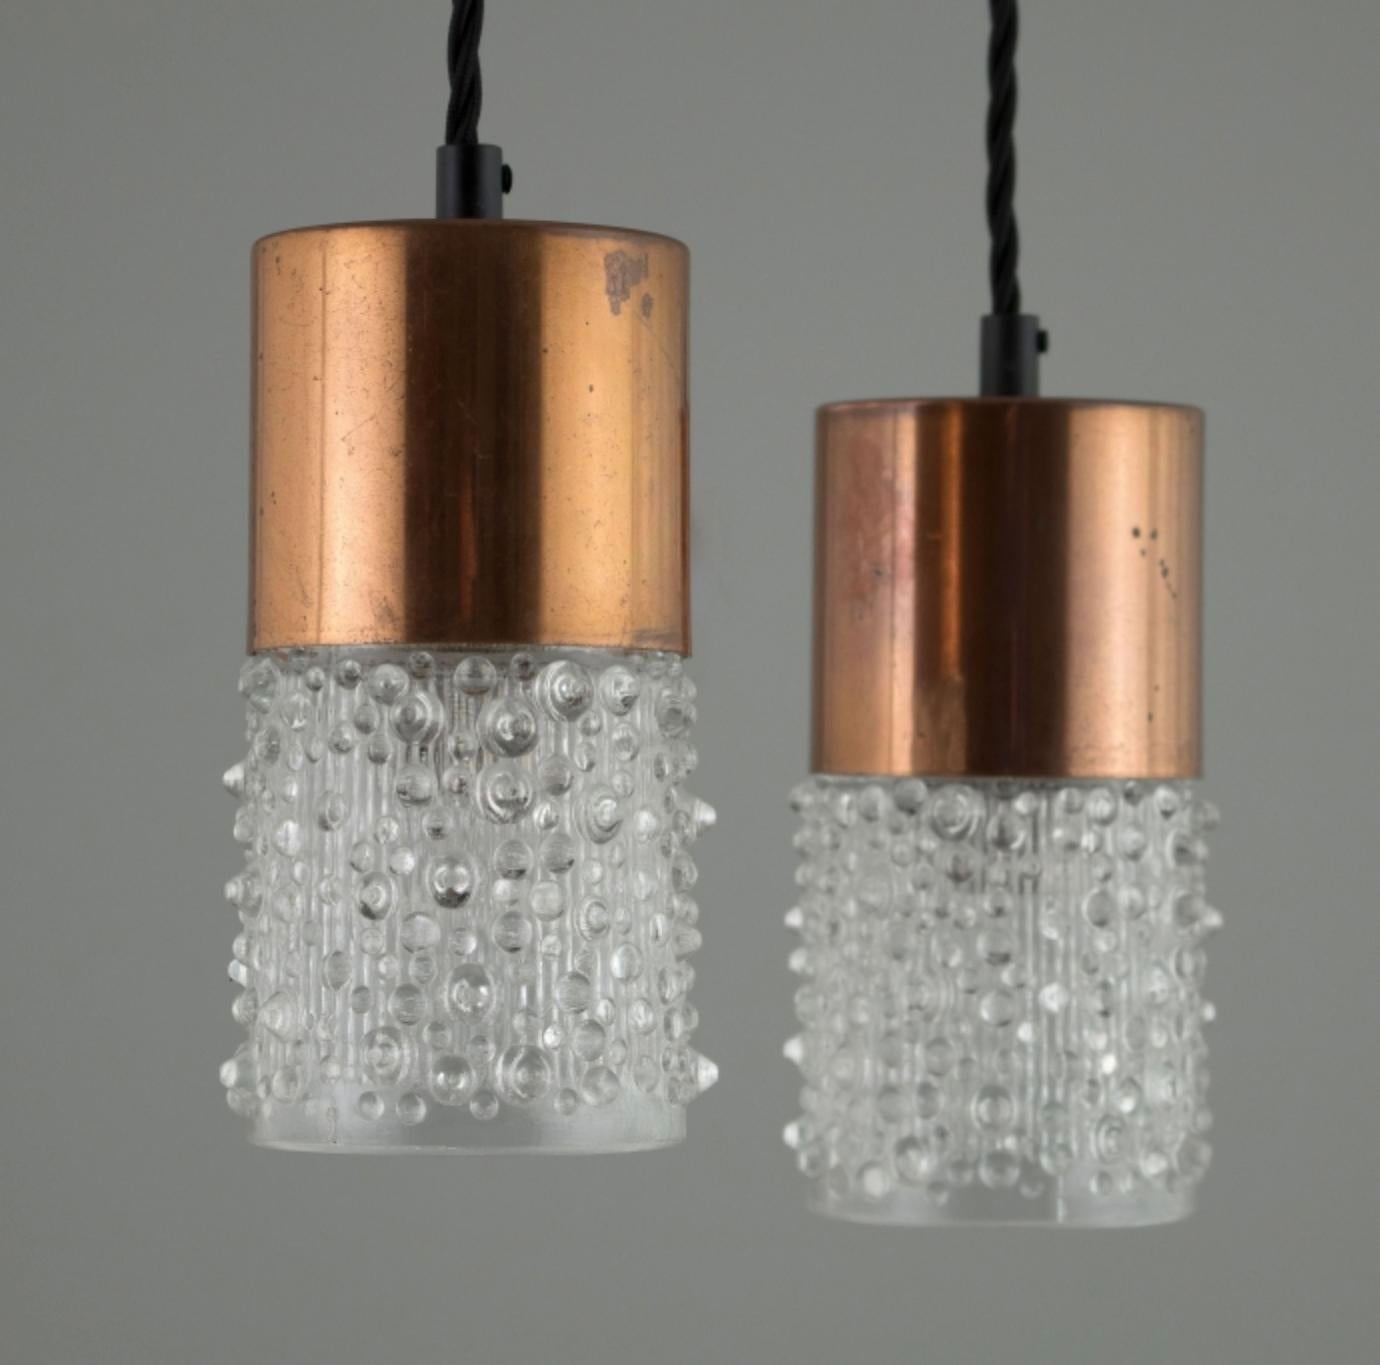 Mid-Century Modern Molded Glass Pendant Lights with Copper Gallery, Germany, Mid-20th Century